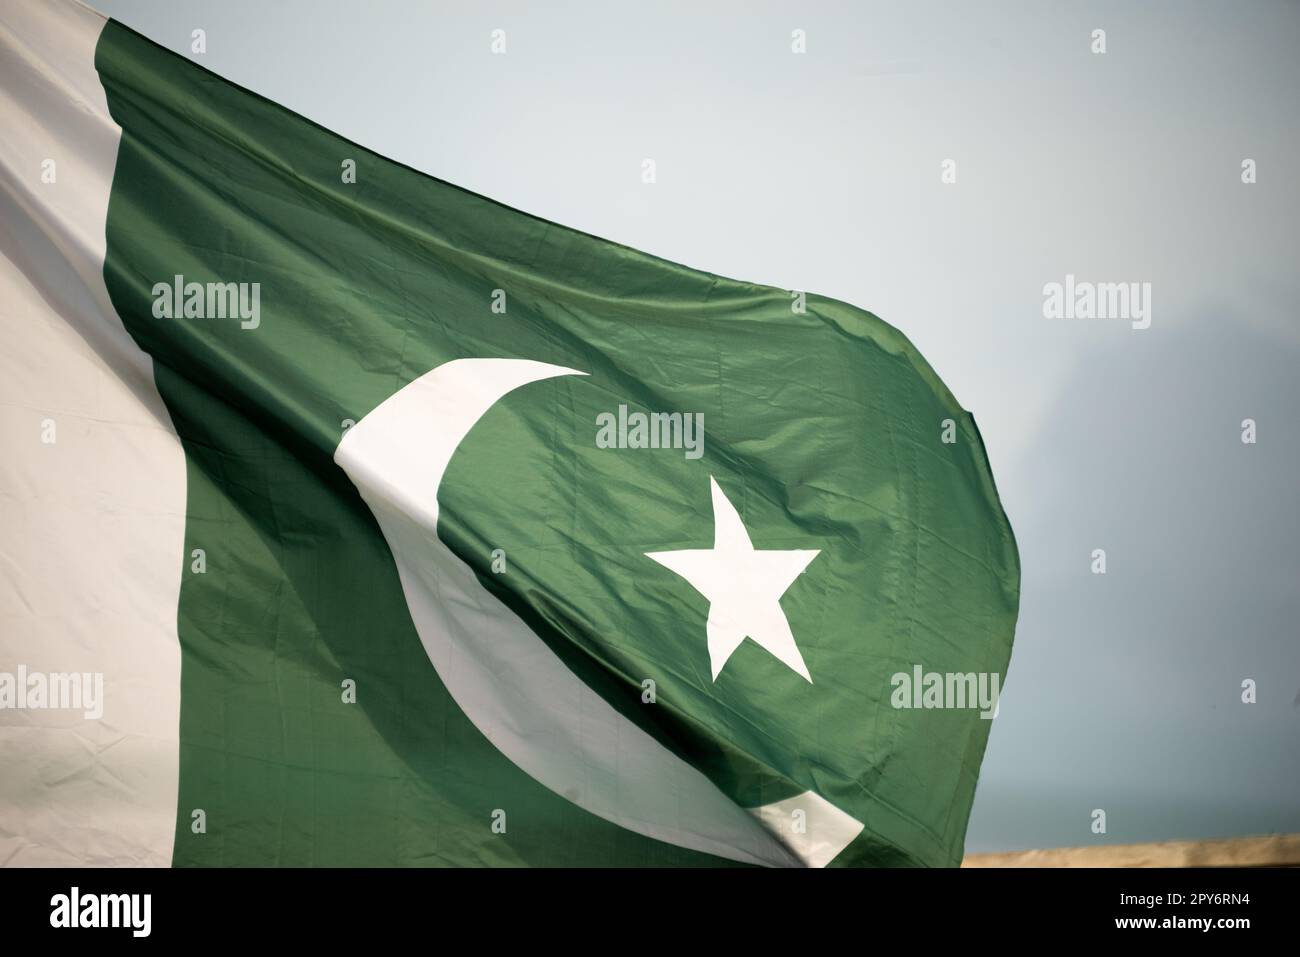 The national flag of Pakistan flying in the blue sky with clouds Stock Photo